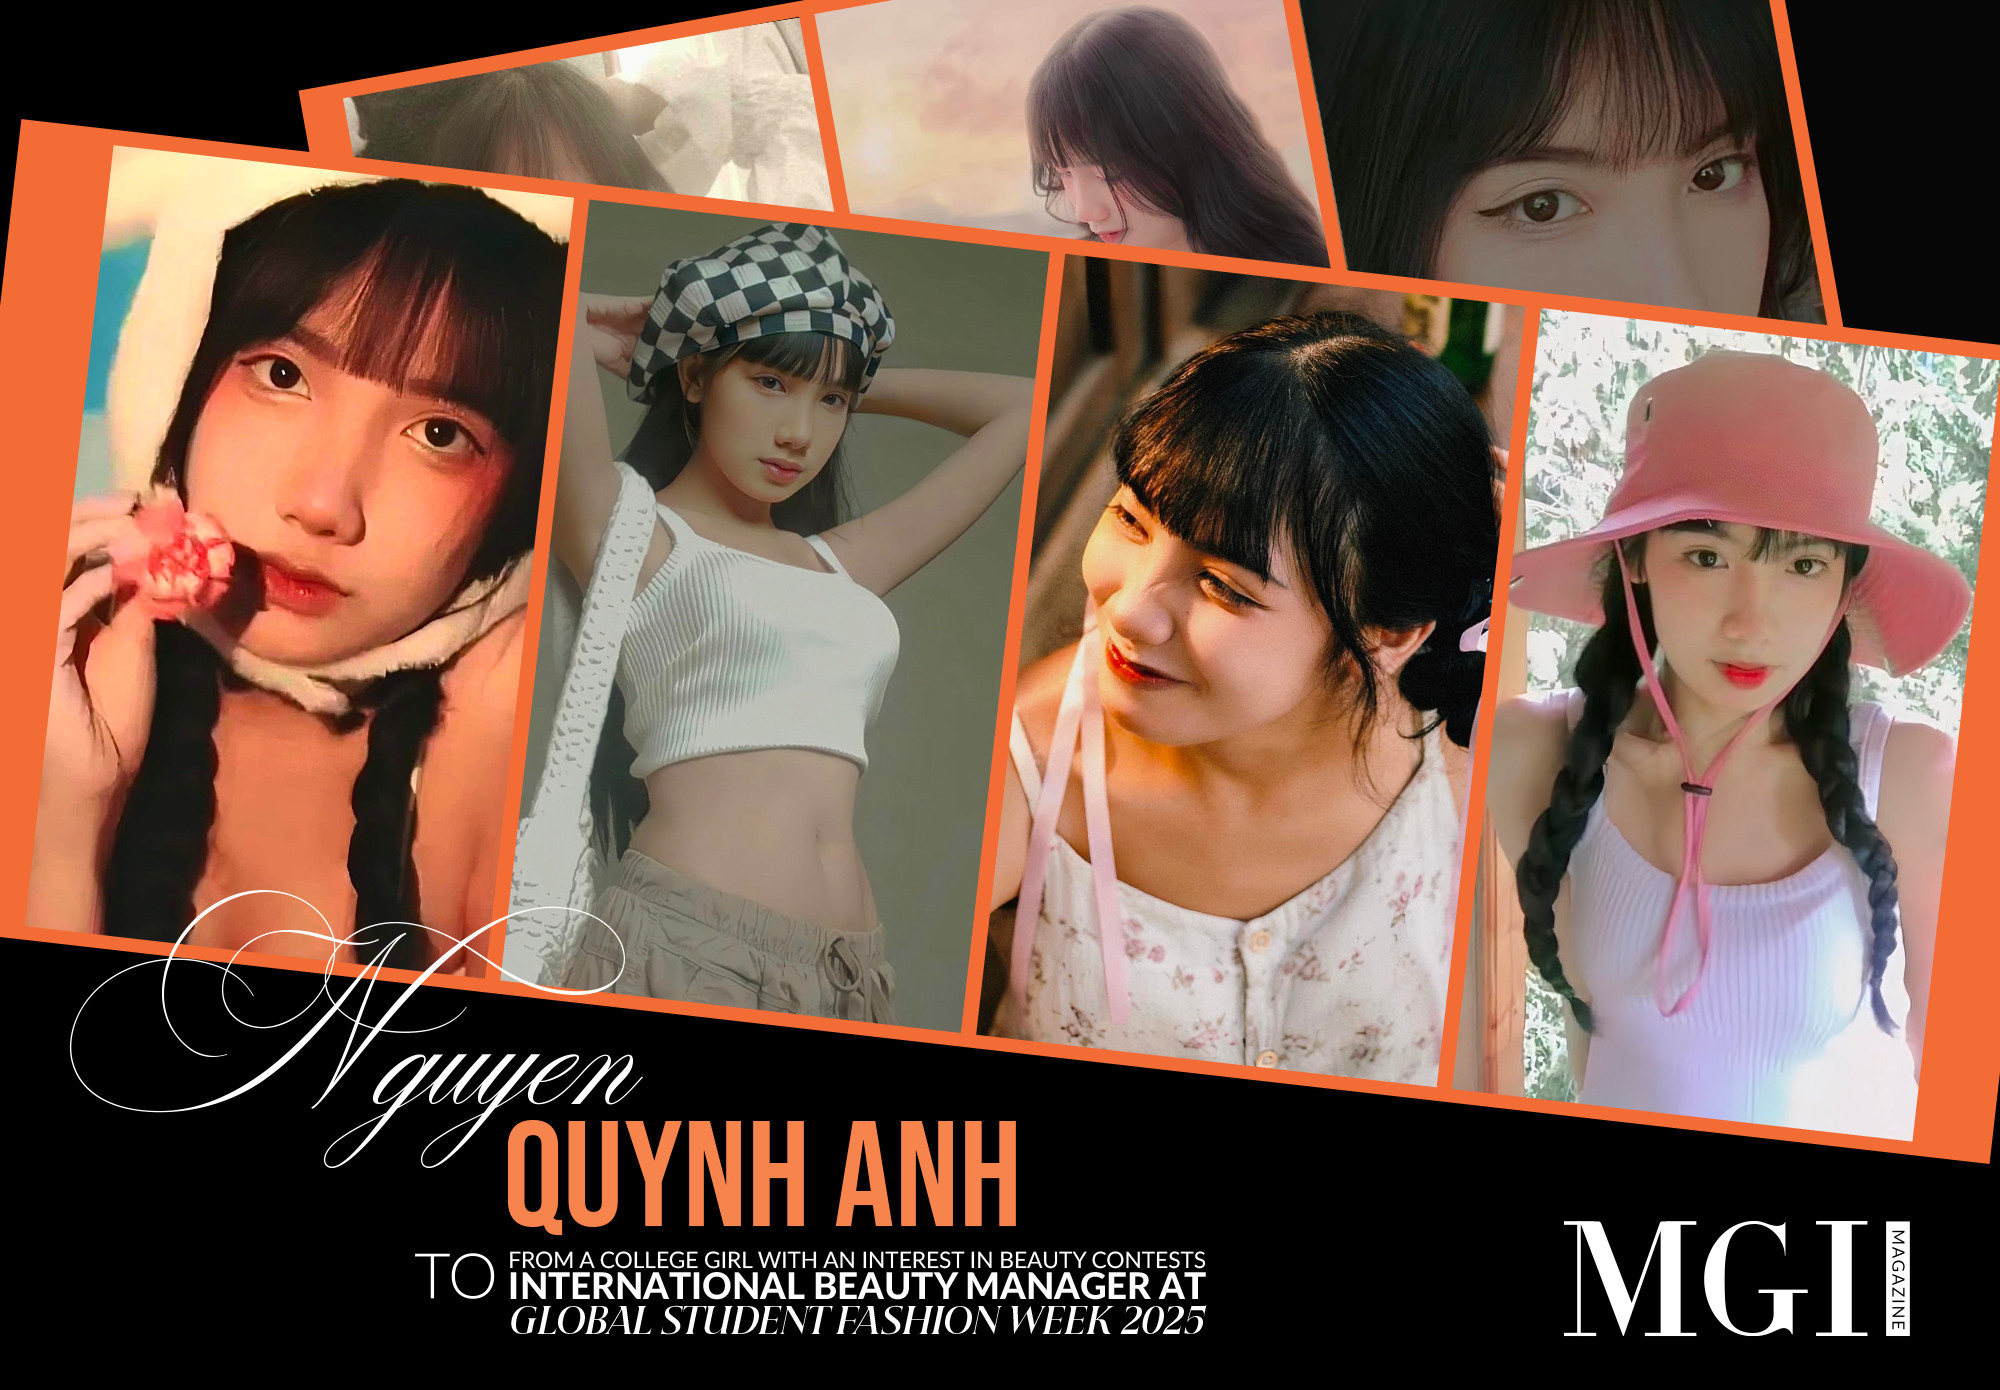 Nguyen Quynh Anh - From a college girl with an interest in beauty contests to international beauty manager at Global Student Fashion Week 2025